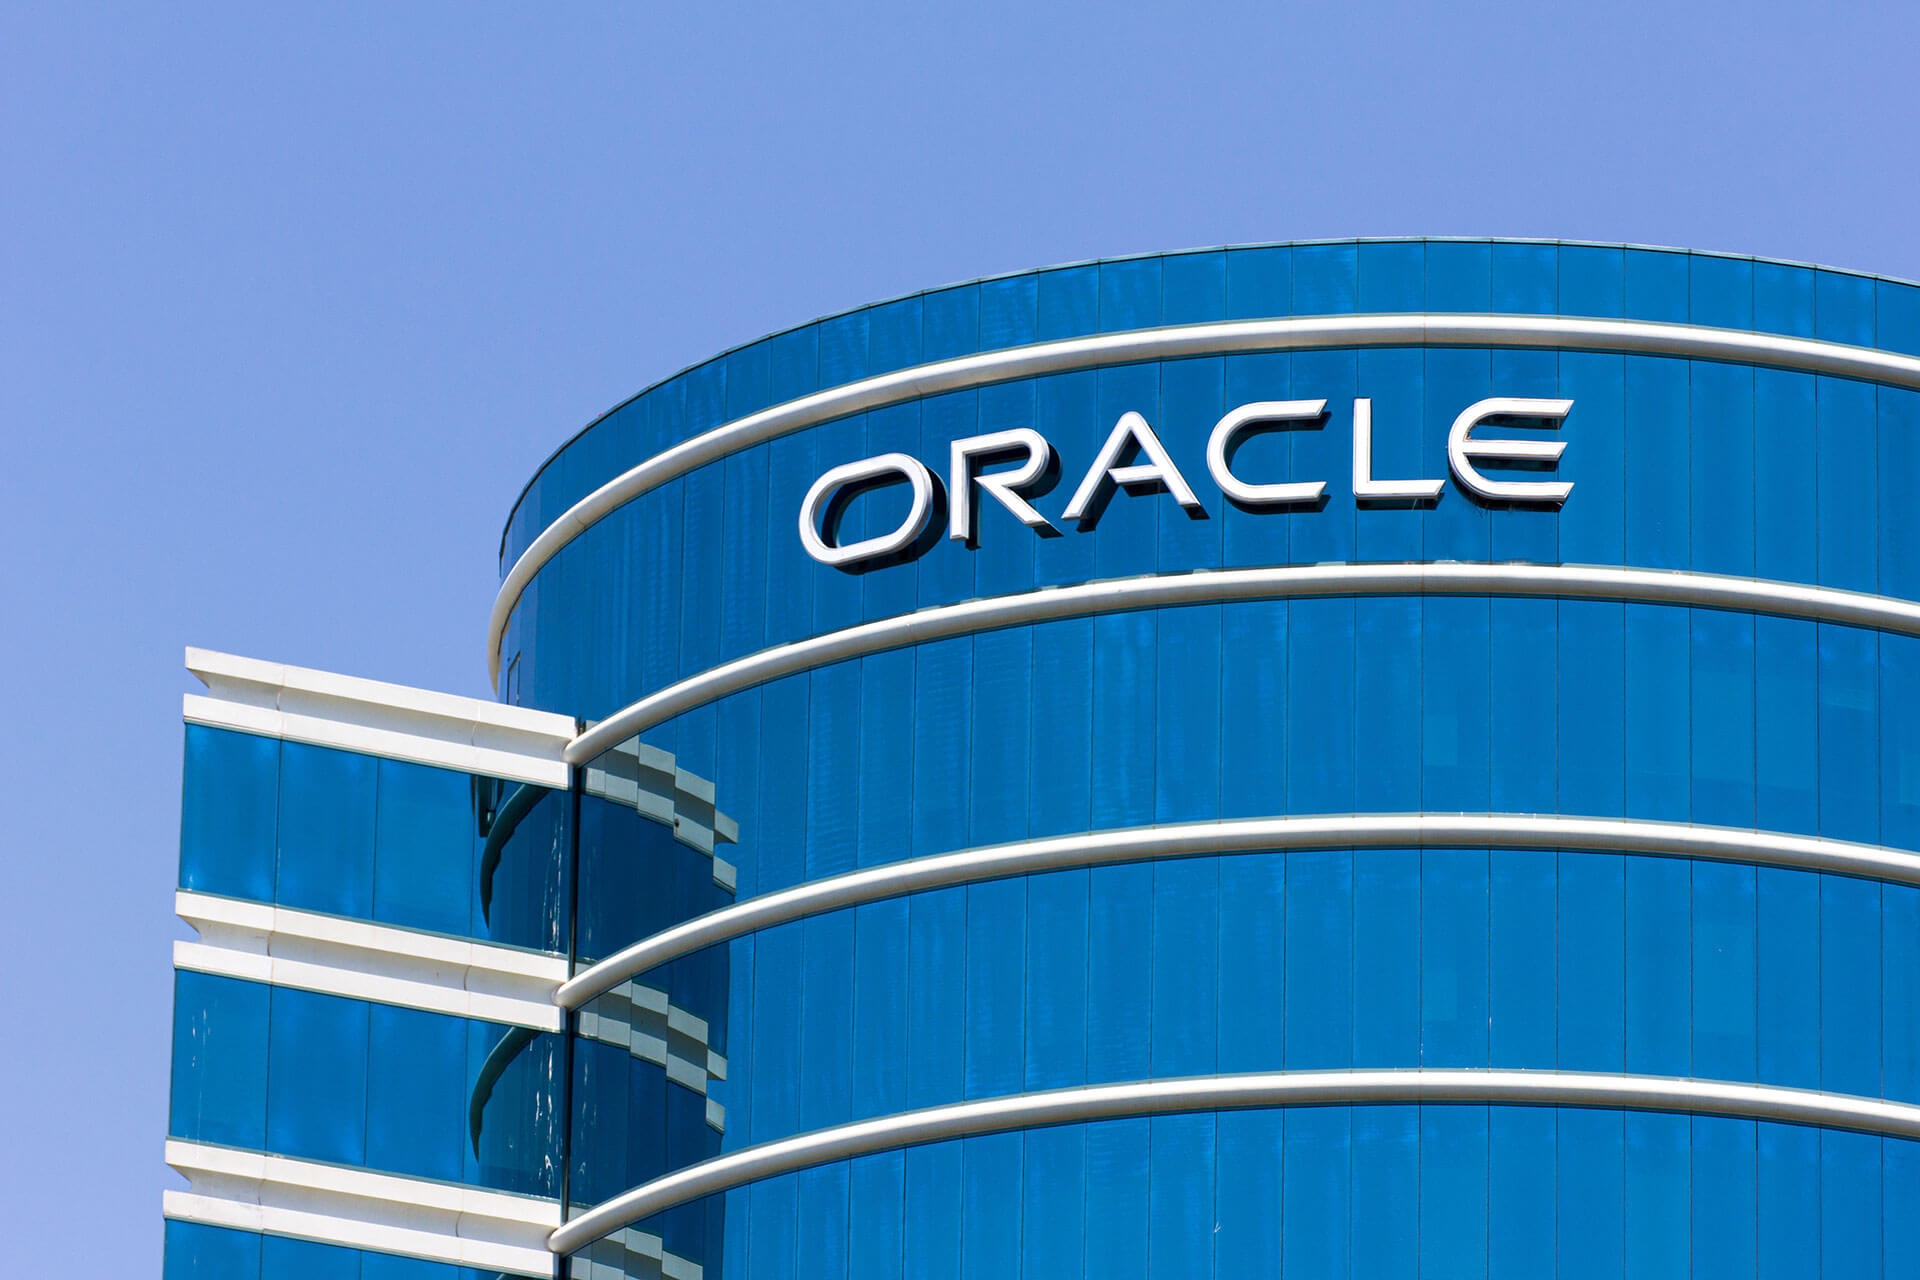 image of Oracle office building